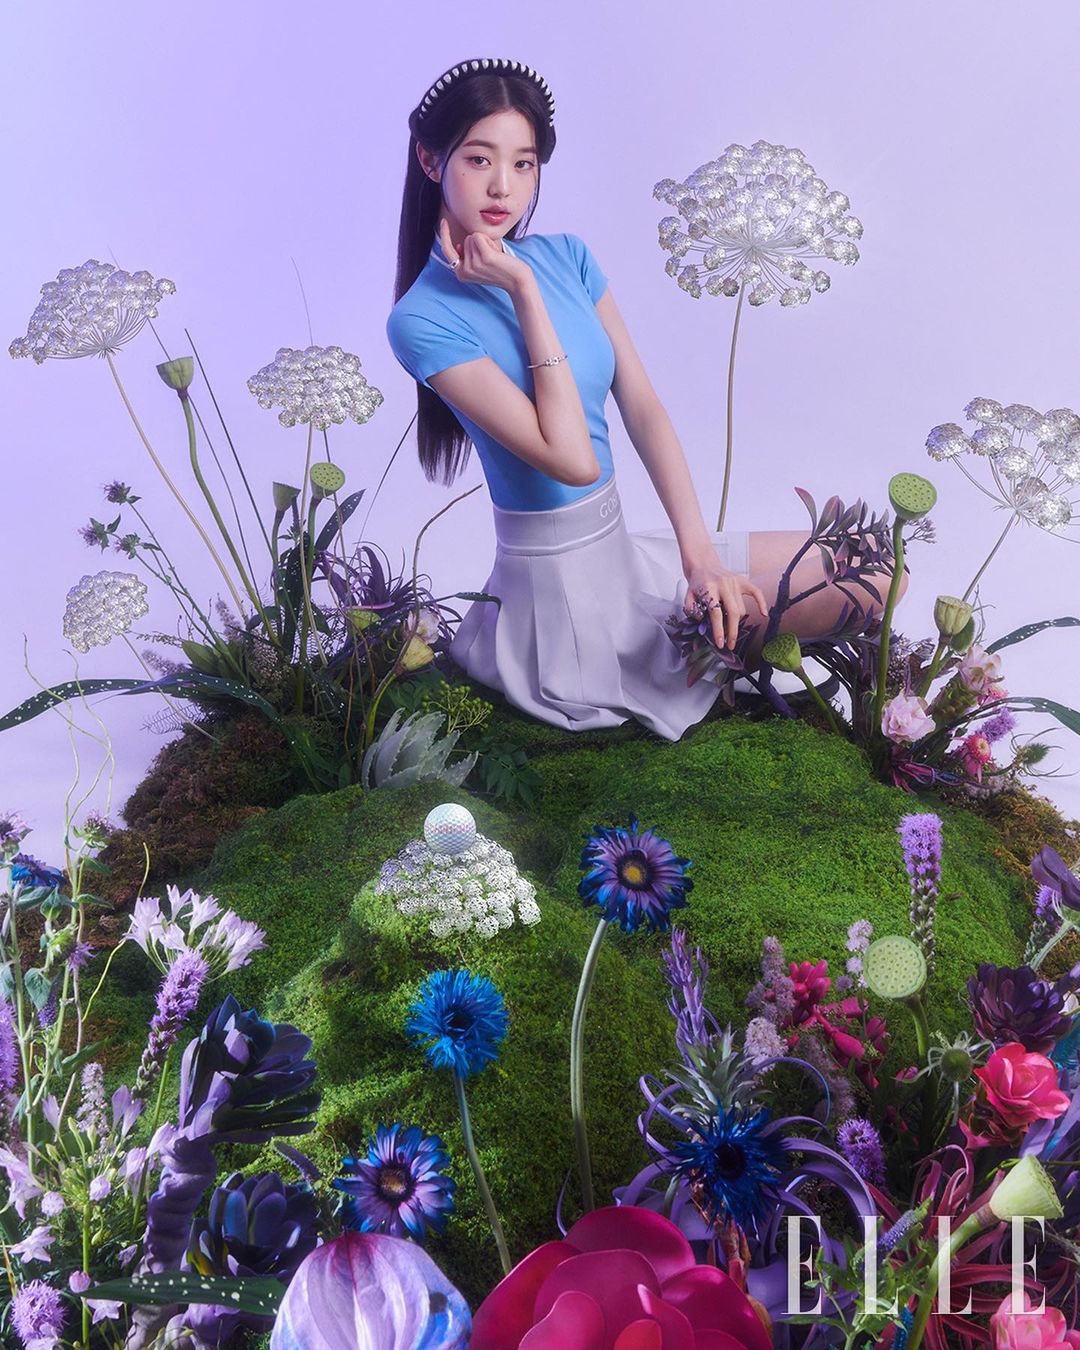 Wonyoung, fairy visual in fairy tale... dreamy atmosphere